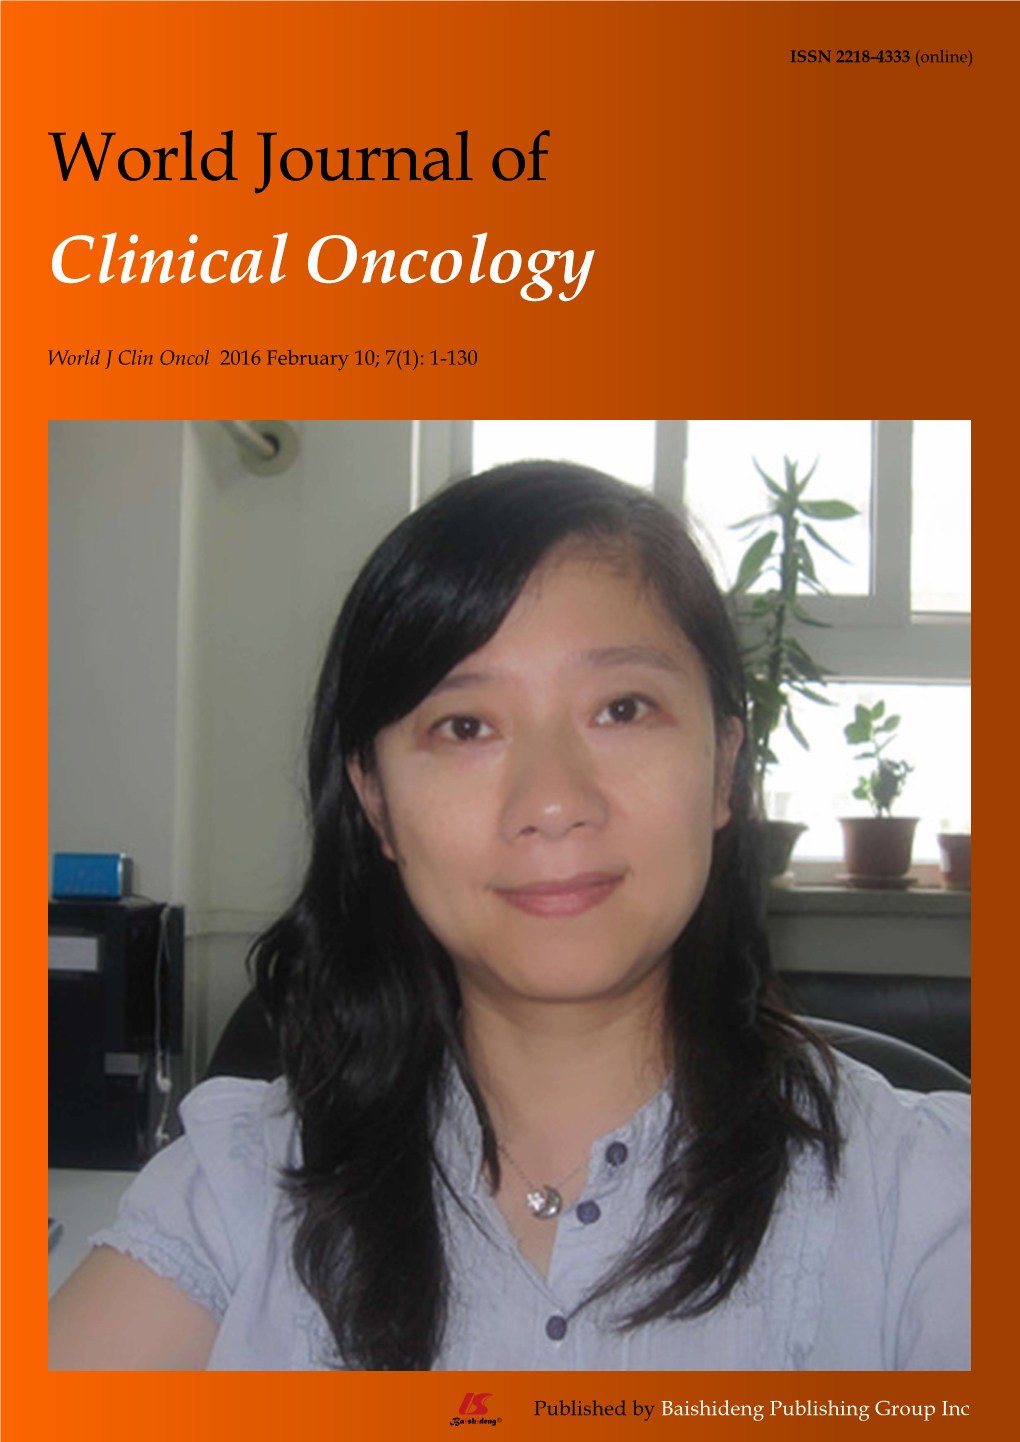 World Journal of Clinical Oncology